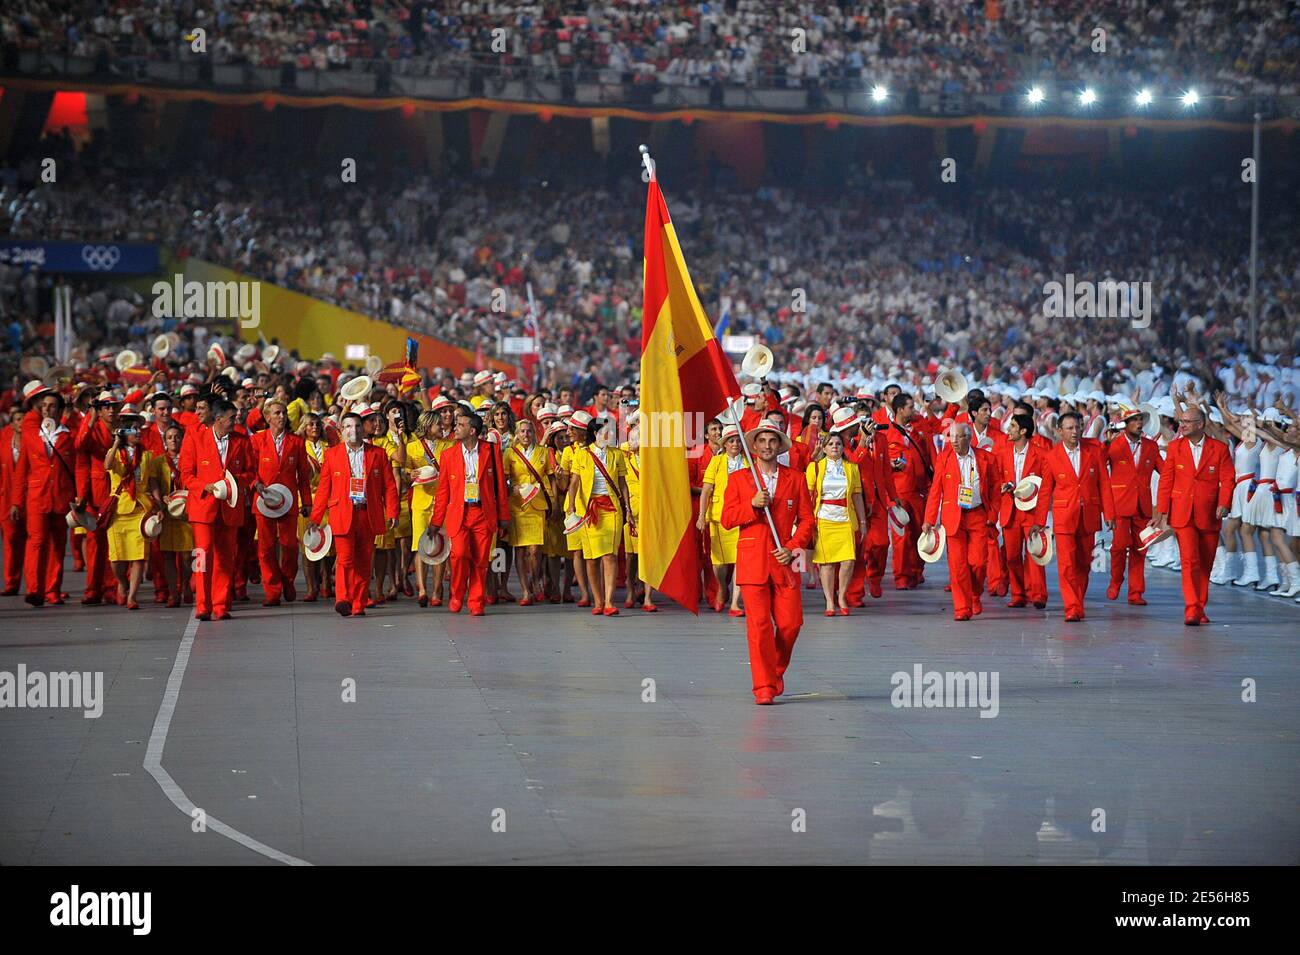 The Spanish delegation during the Opening Ceremony for the 2008 Beijing Summer Olympics at the National Stadium in Beijing, China on August 8, 2008. Photo by Jean-Michel Psaila/ABACAPRESS.COM Stock Photo